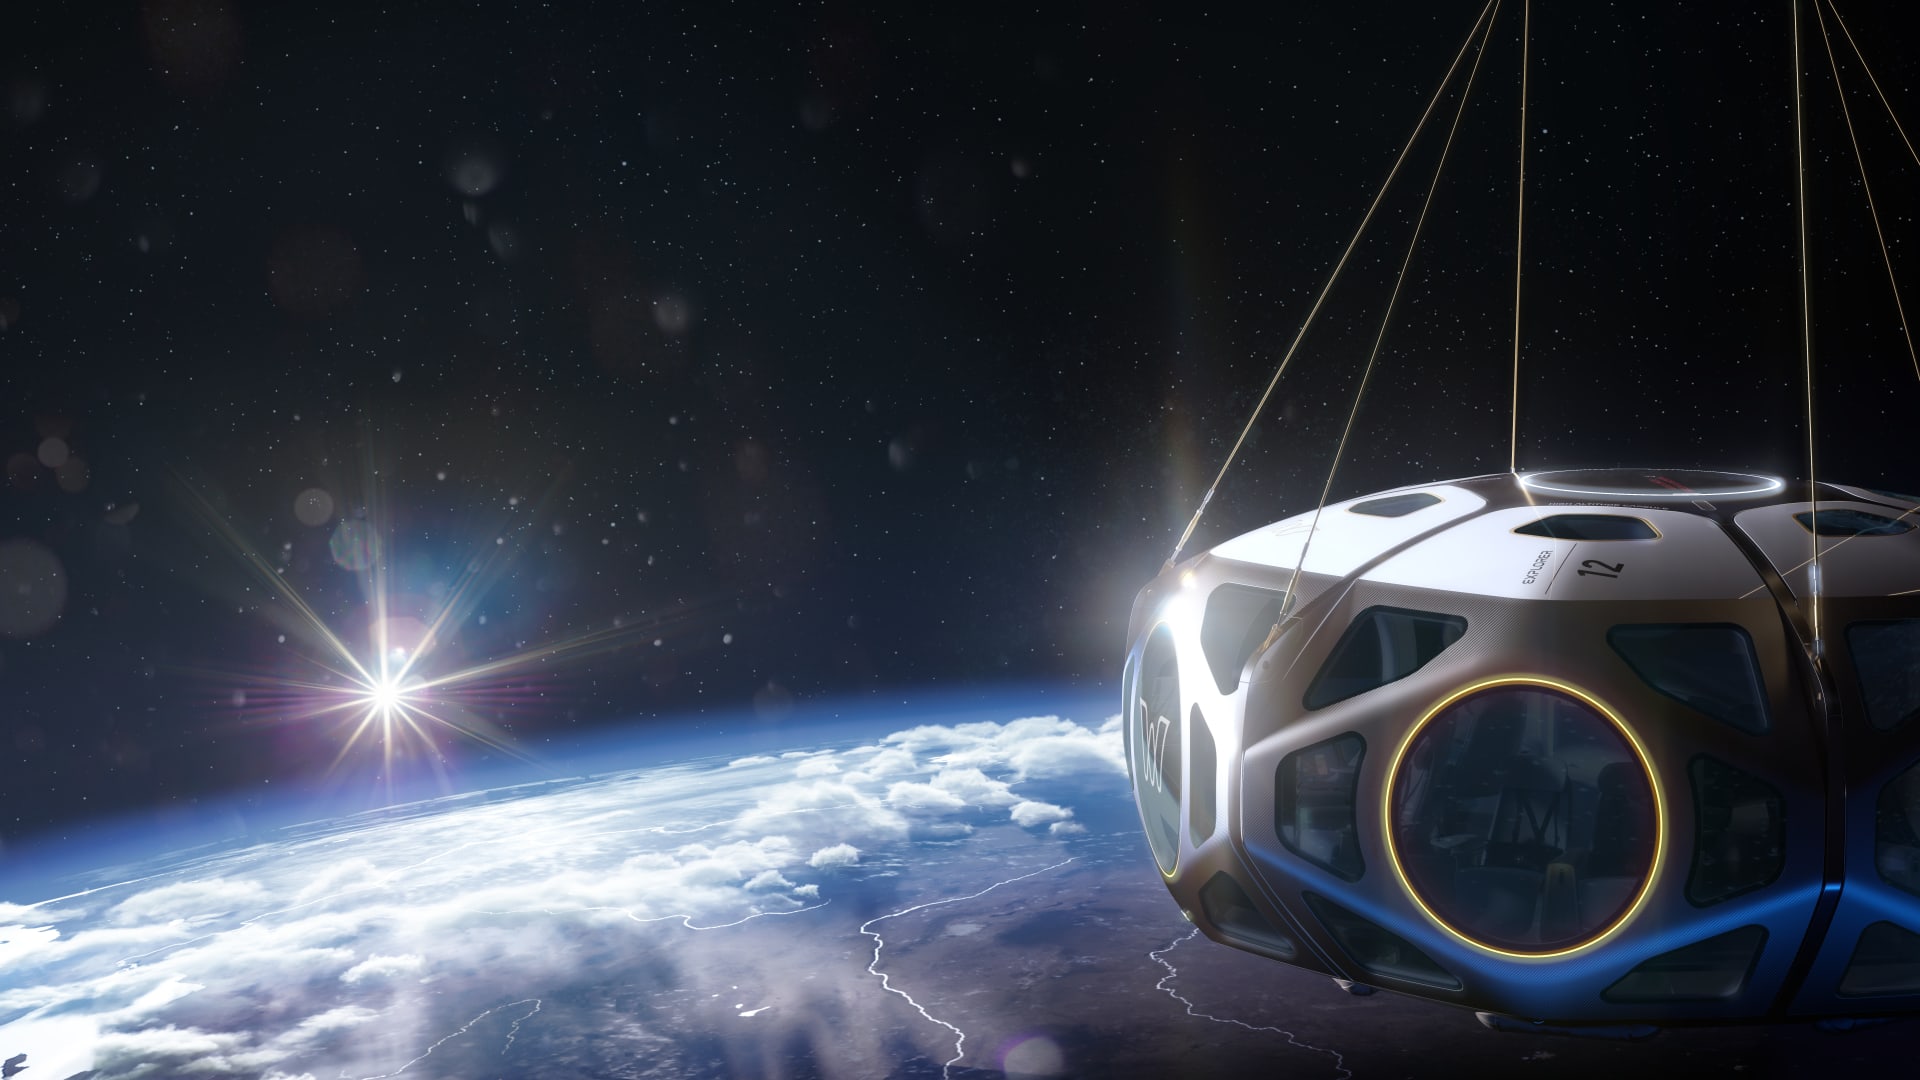 A rendering of one of World View's space capsules, which are set to launch from spaceports near the United States' Grand Canyon and Australia's Great Barrier Reef in 2024.